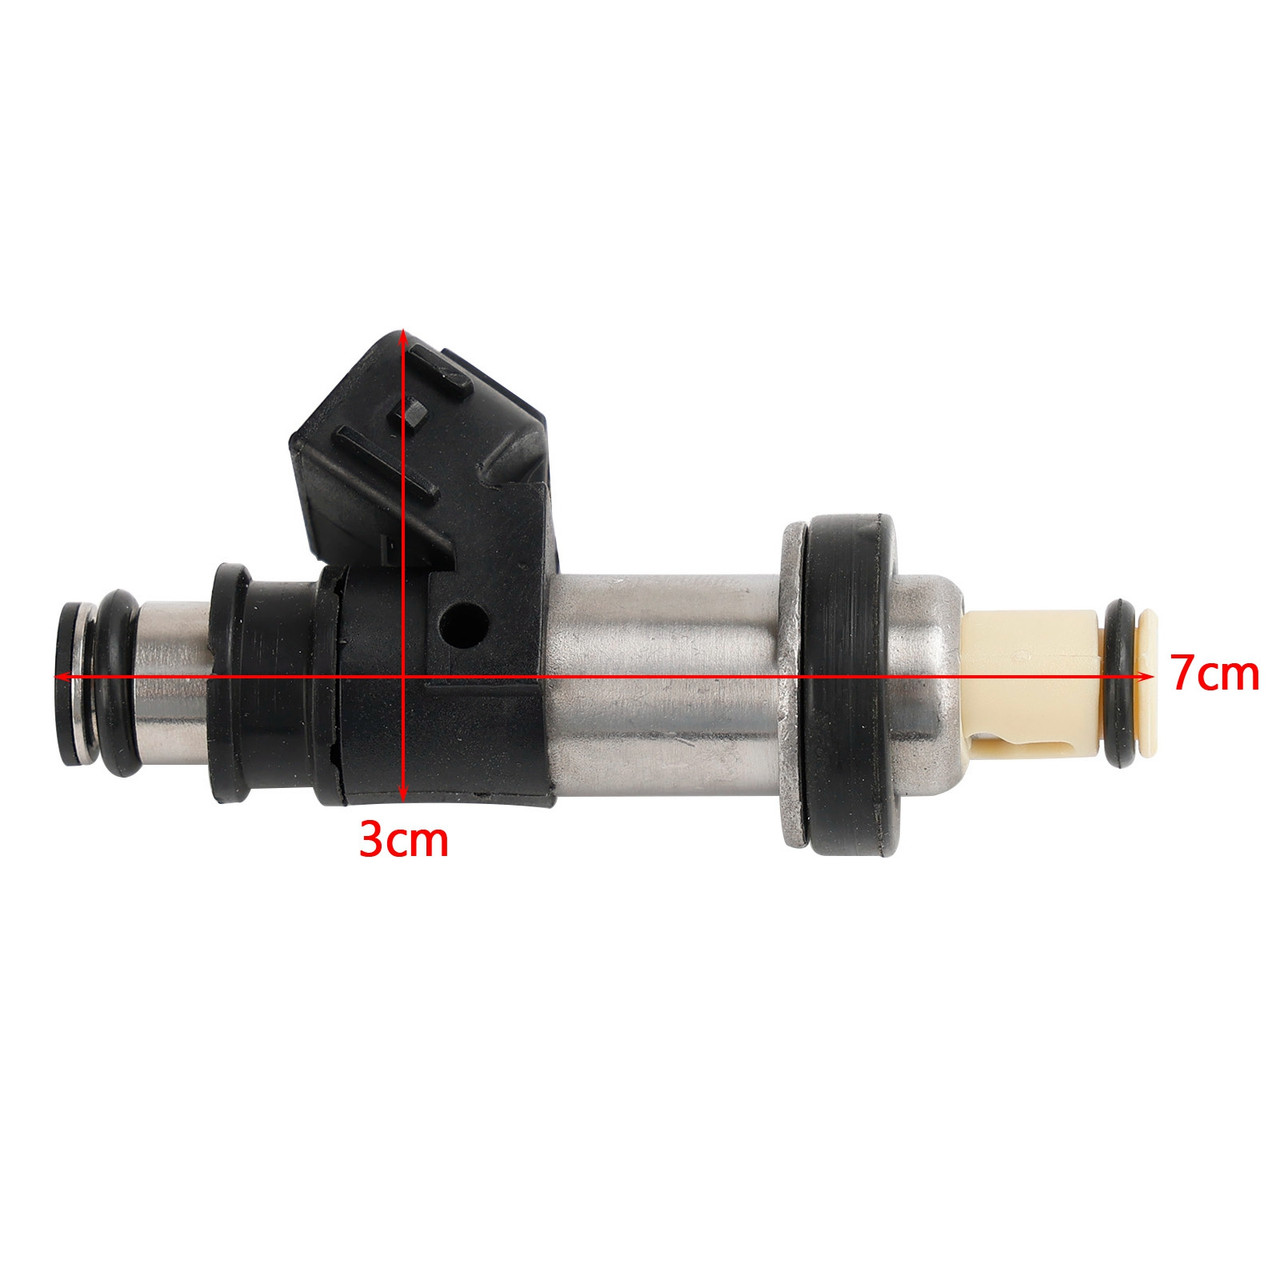 16406-ZW5-000 Fuel Injectors For Honda Outboard MP7770 4 Stroke BF115-130HP